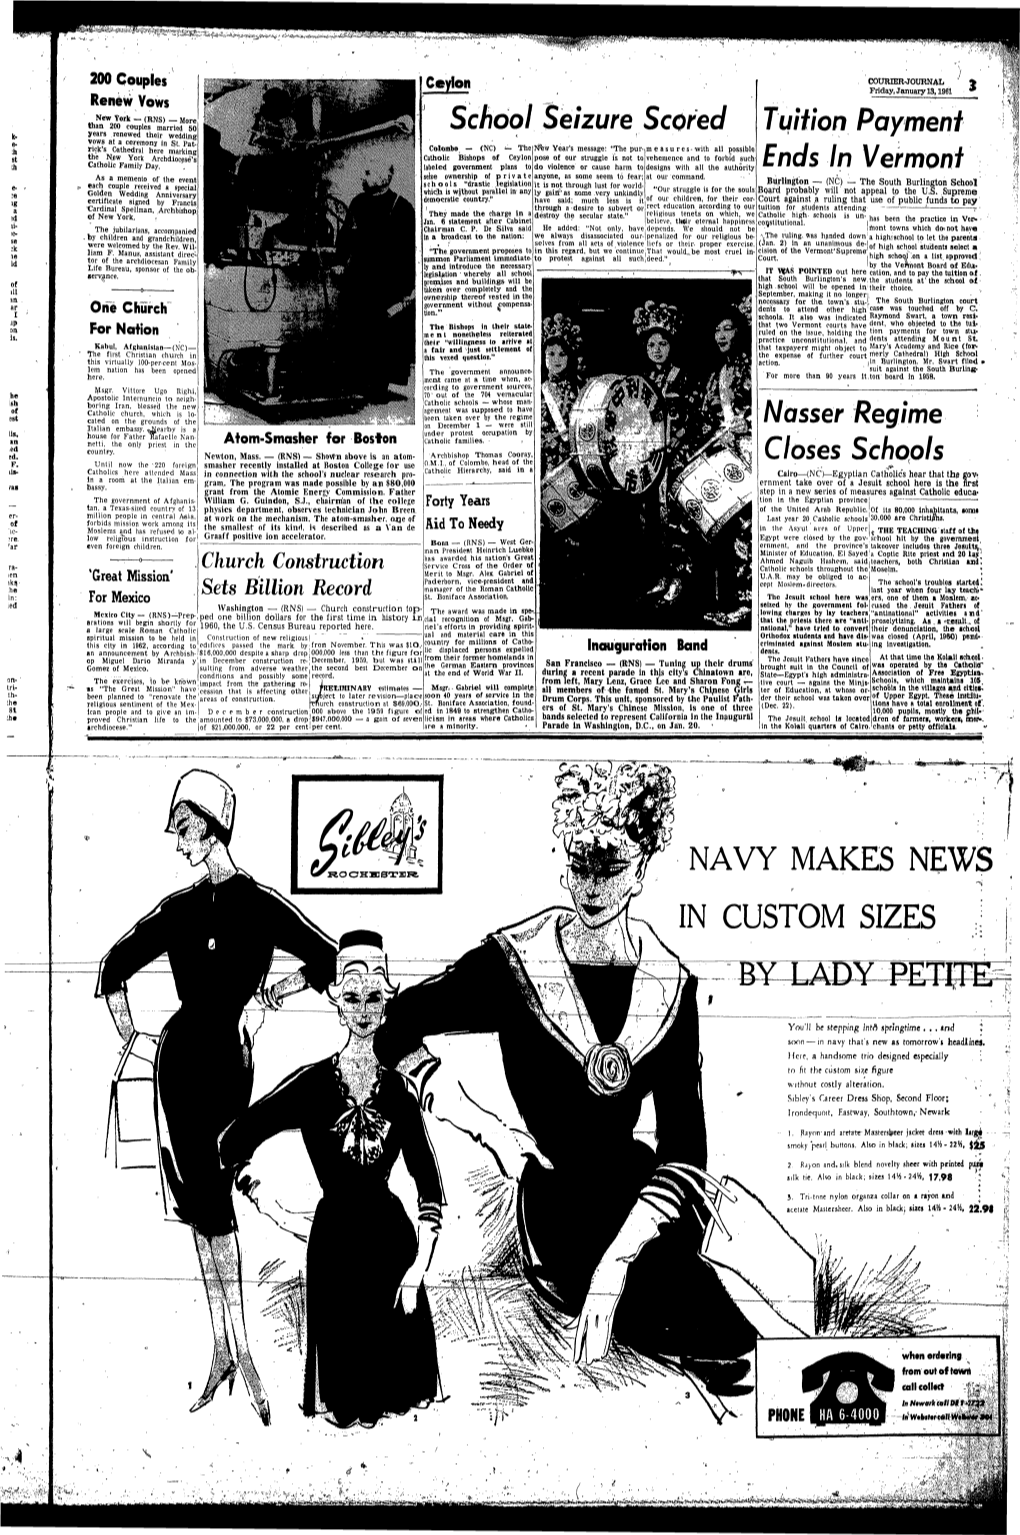 Catholic-Courier-Journal-1961